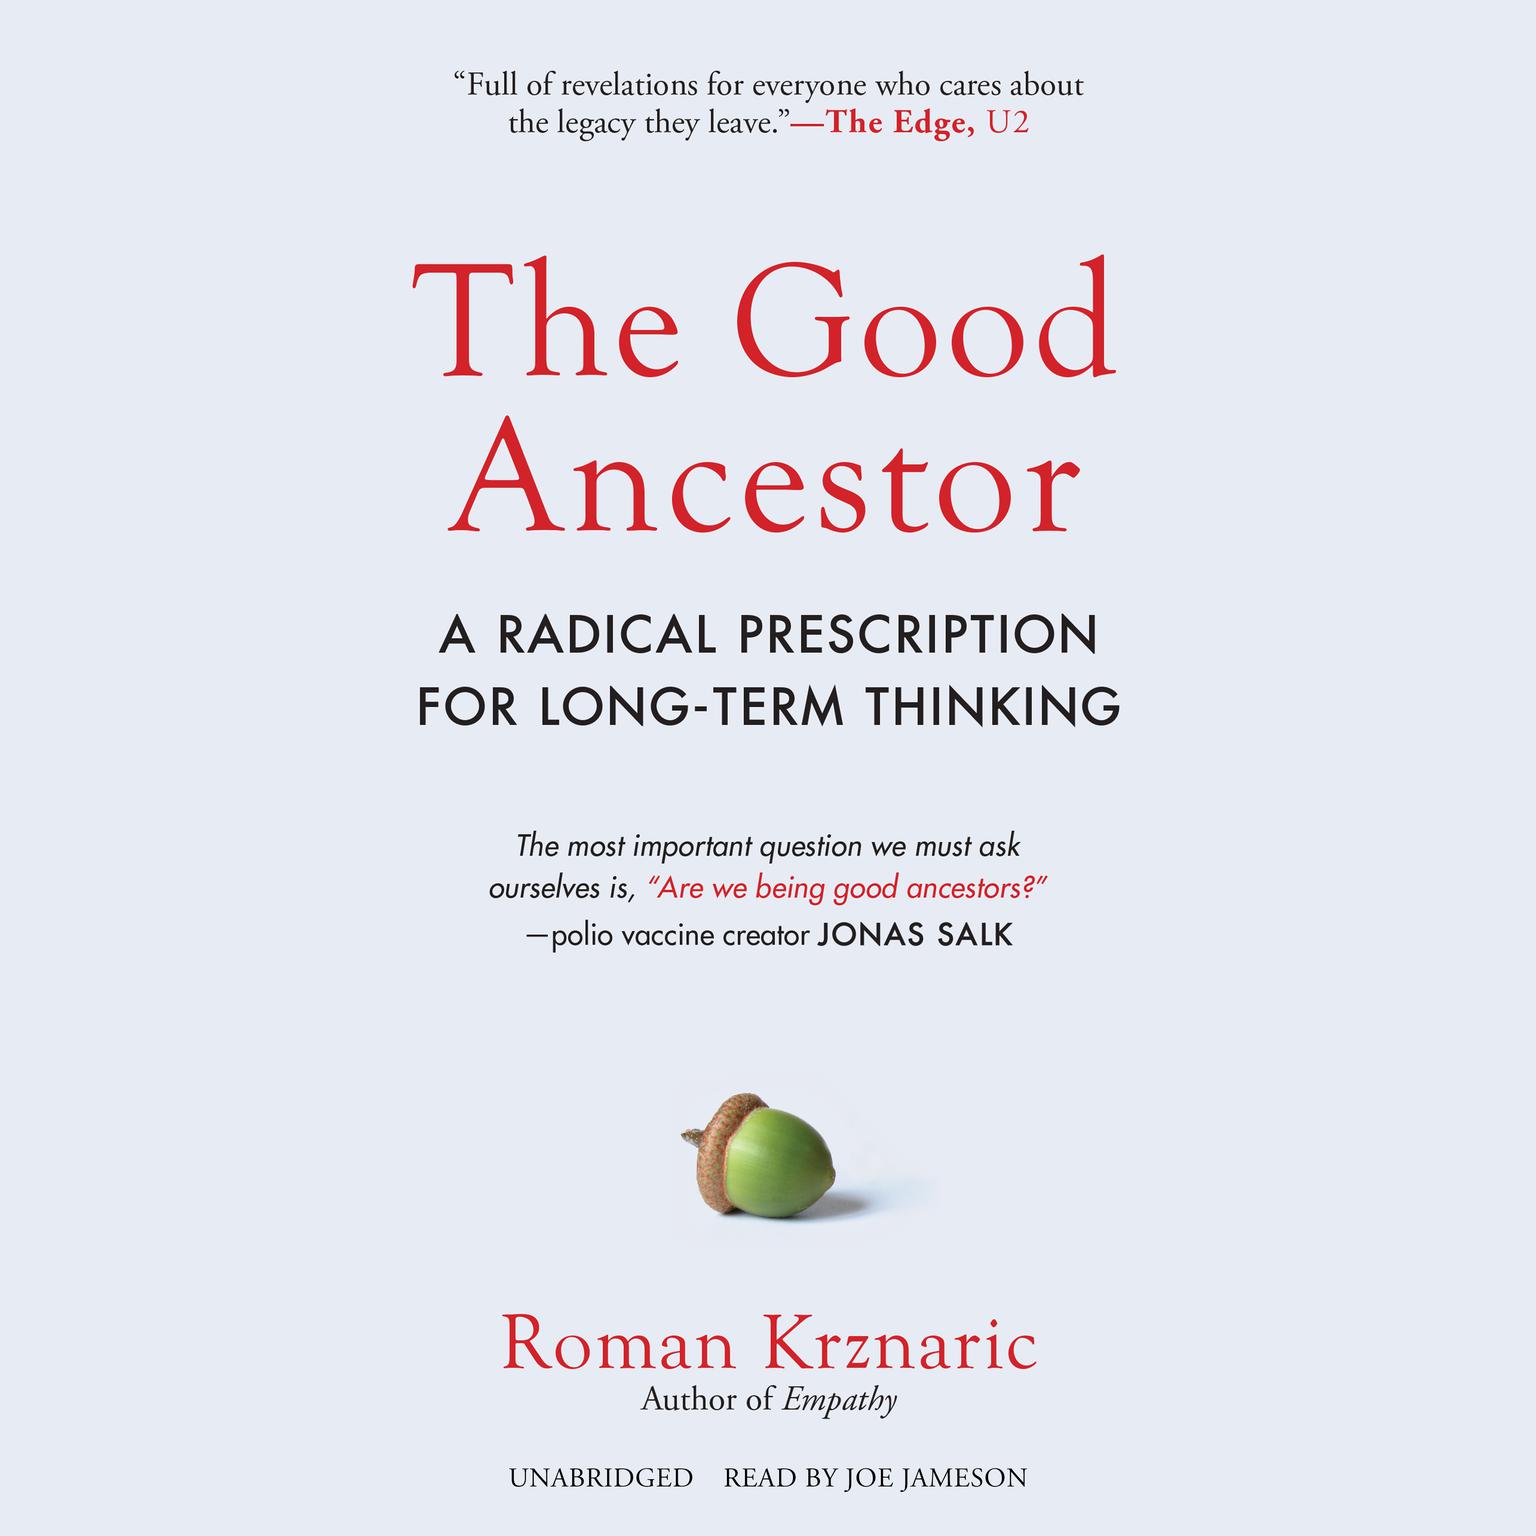 The Good Ancestor: A Radical Prescription for Long-Term Thinking Audiobook, by Roman Krznaric